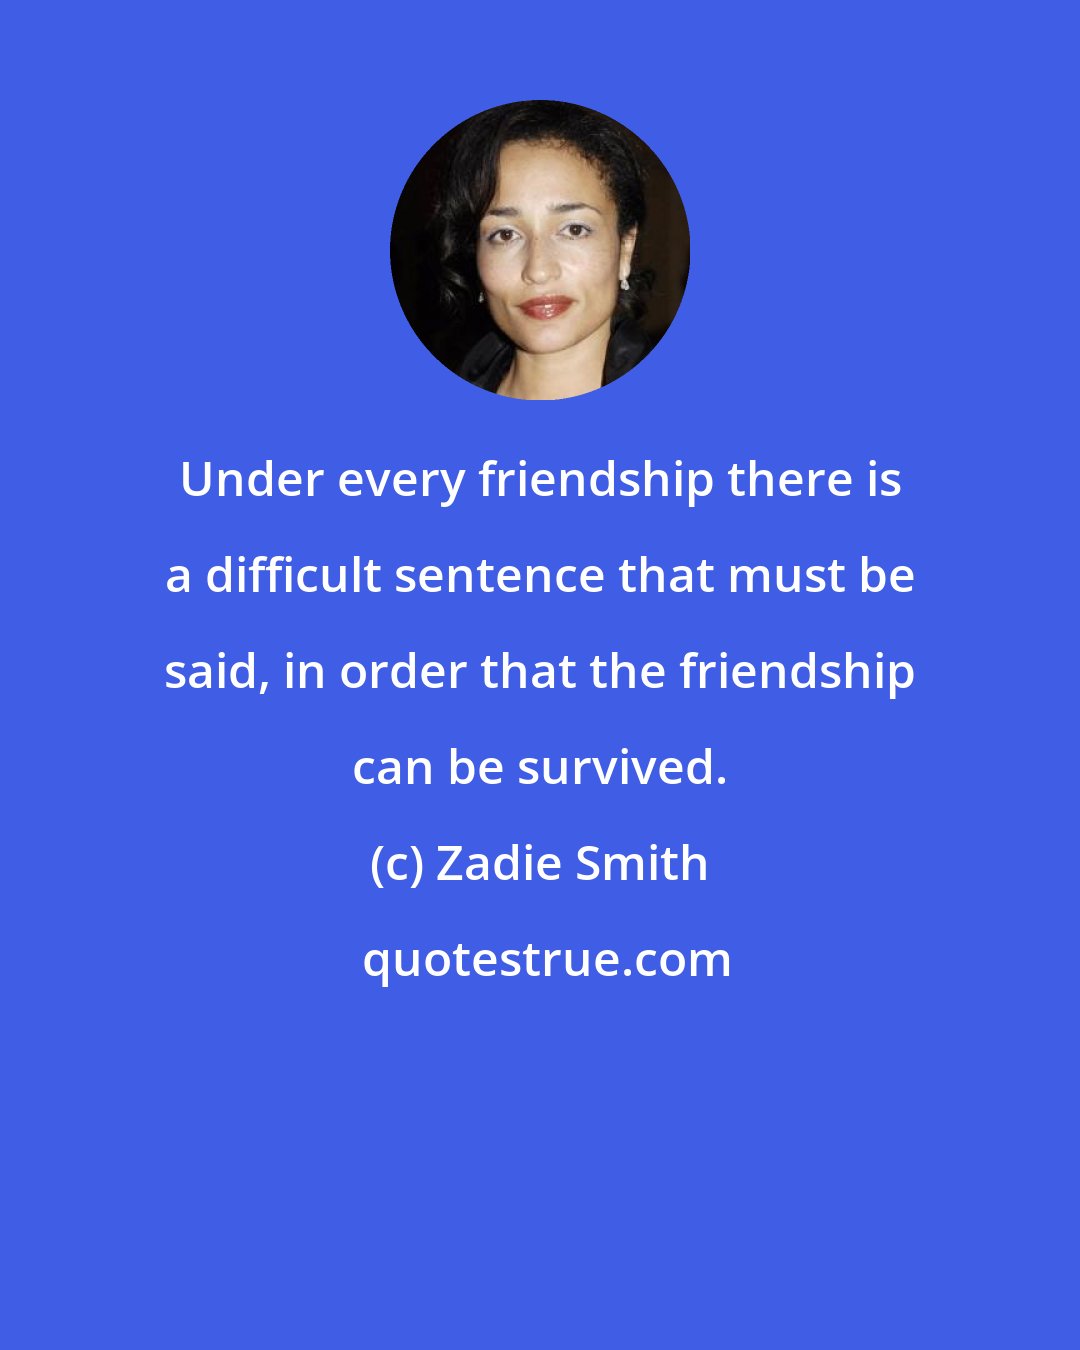 Zadie Smith: Under every friendship there is a difficult sentence that must be said, in order that the friendship can be survived.